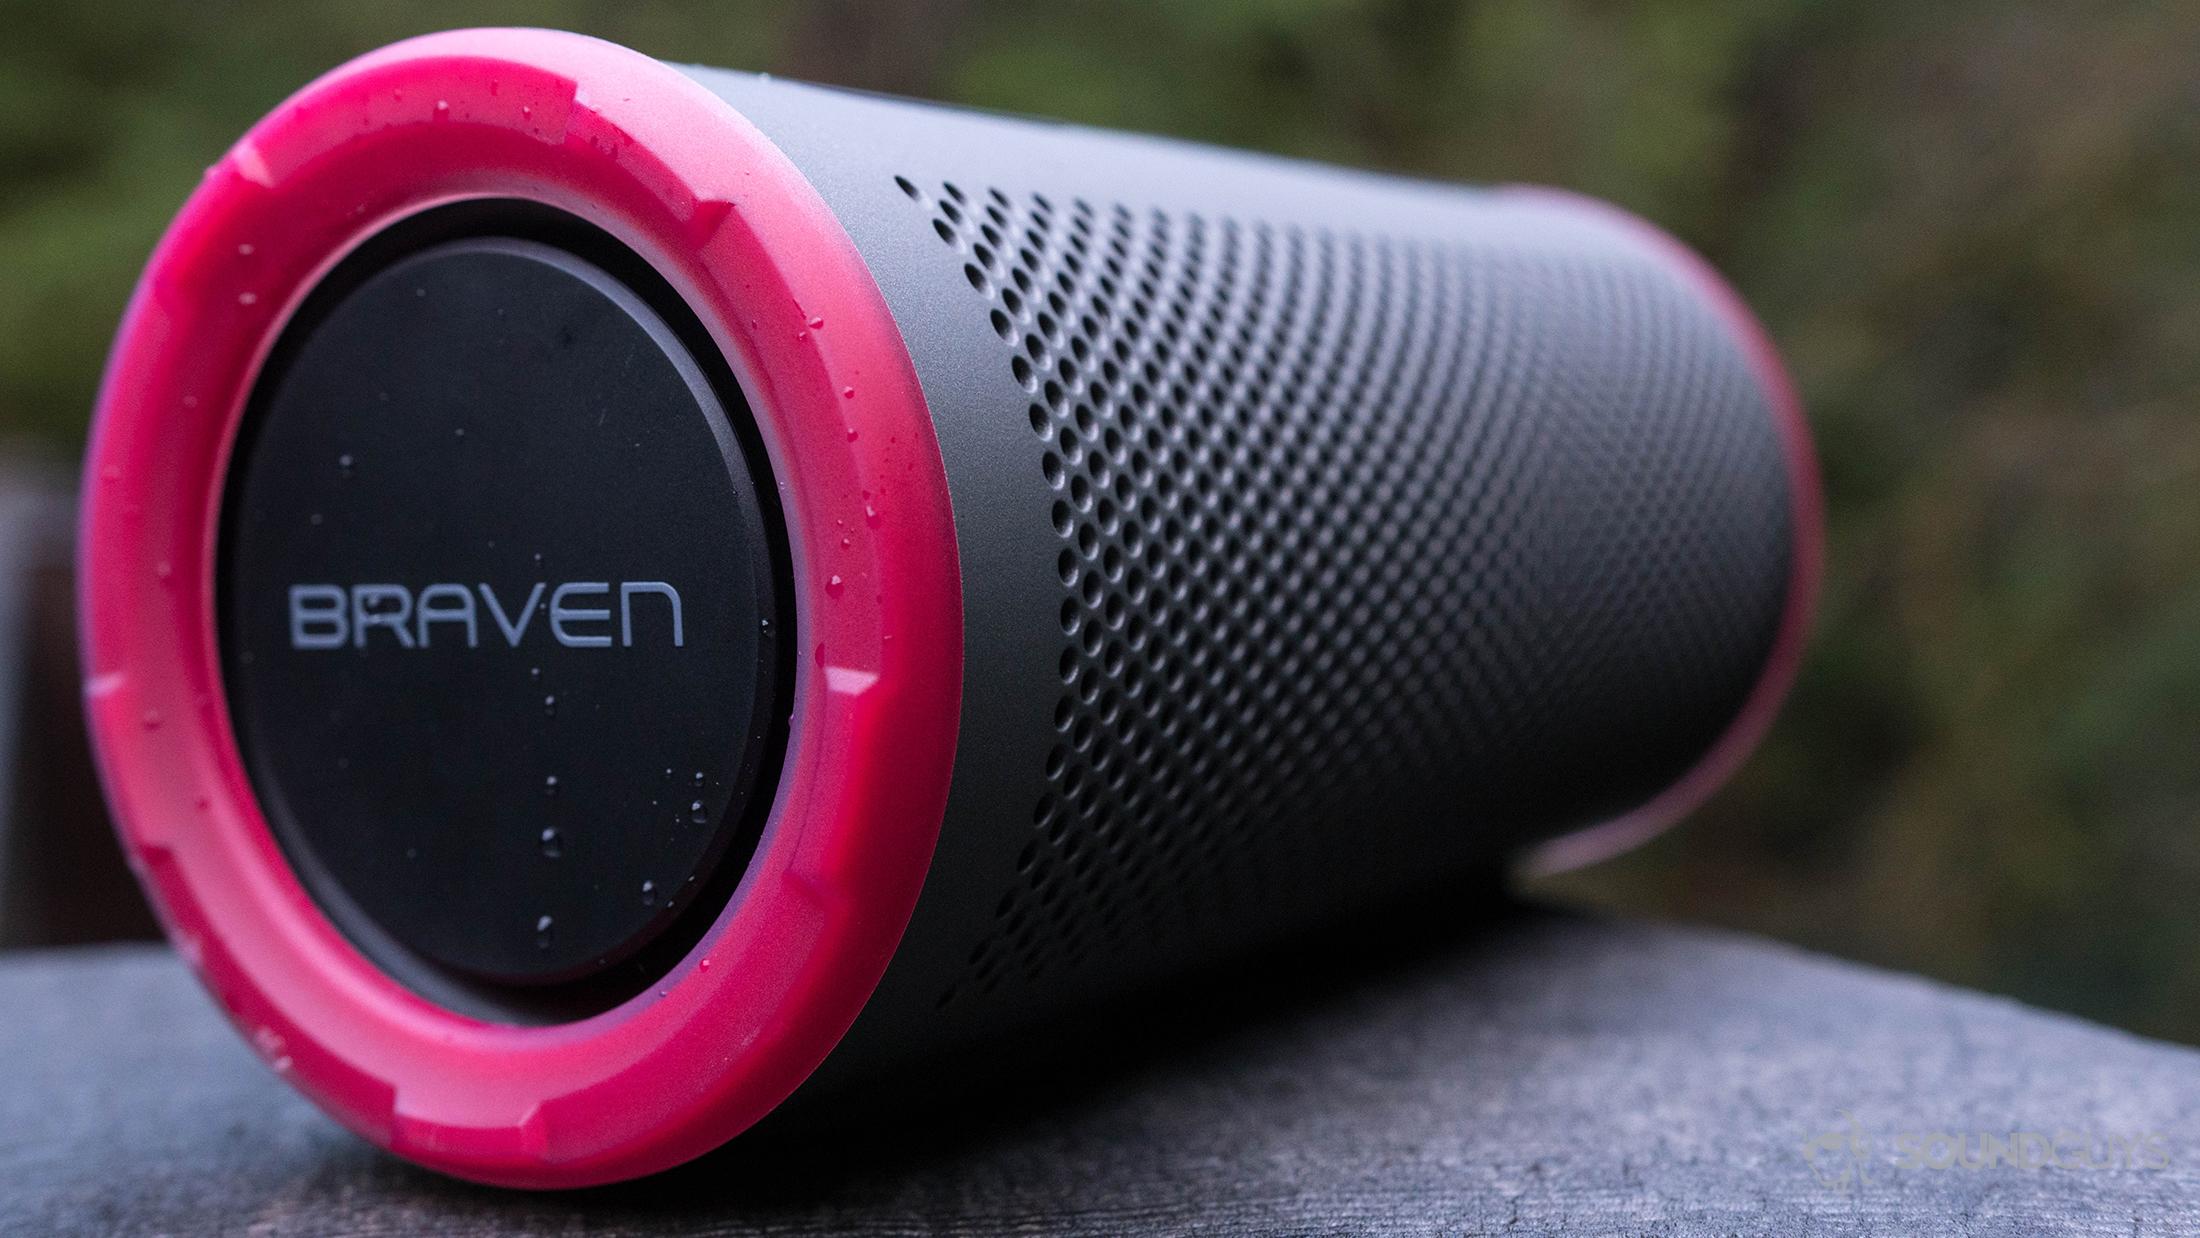 Review: the Waterproof Braven 105 Bluetooth Speaker Livened up My